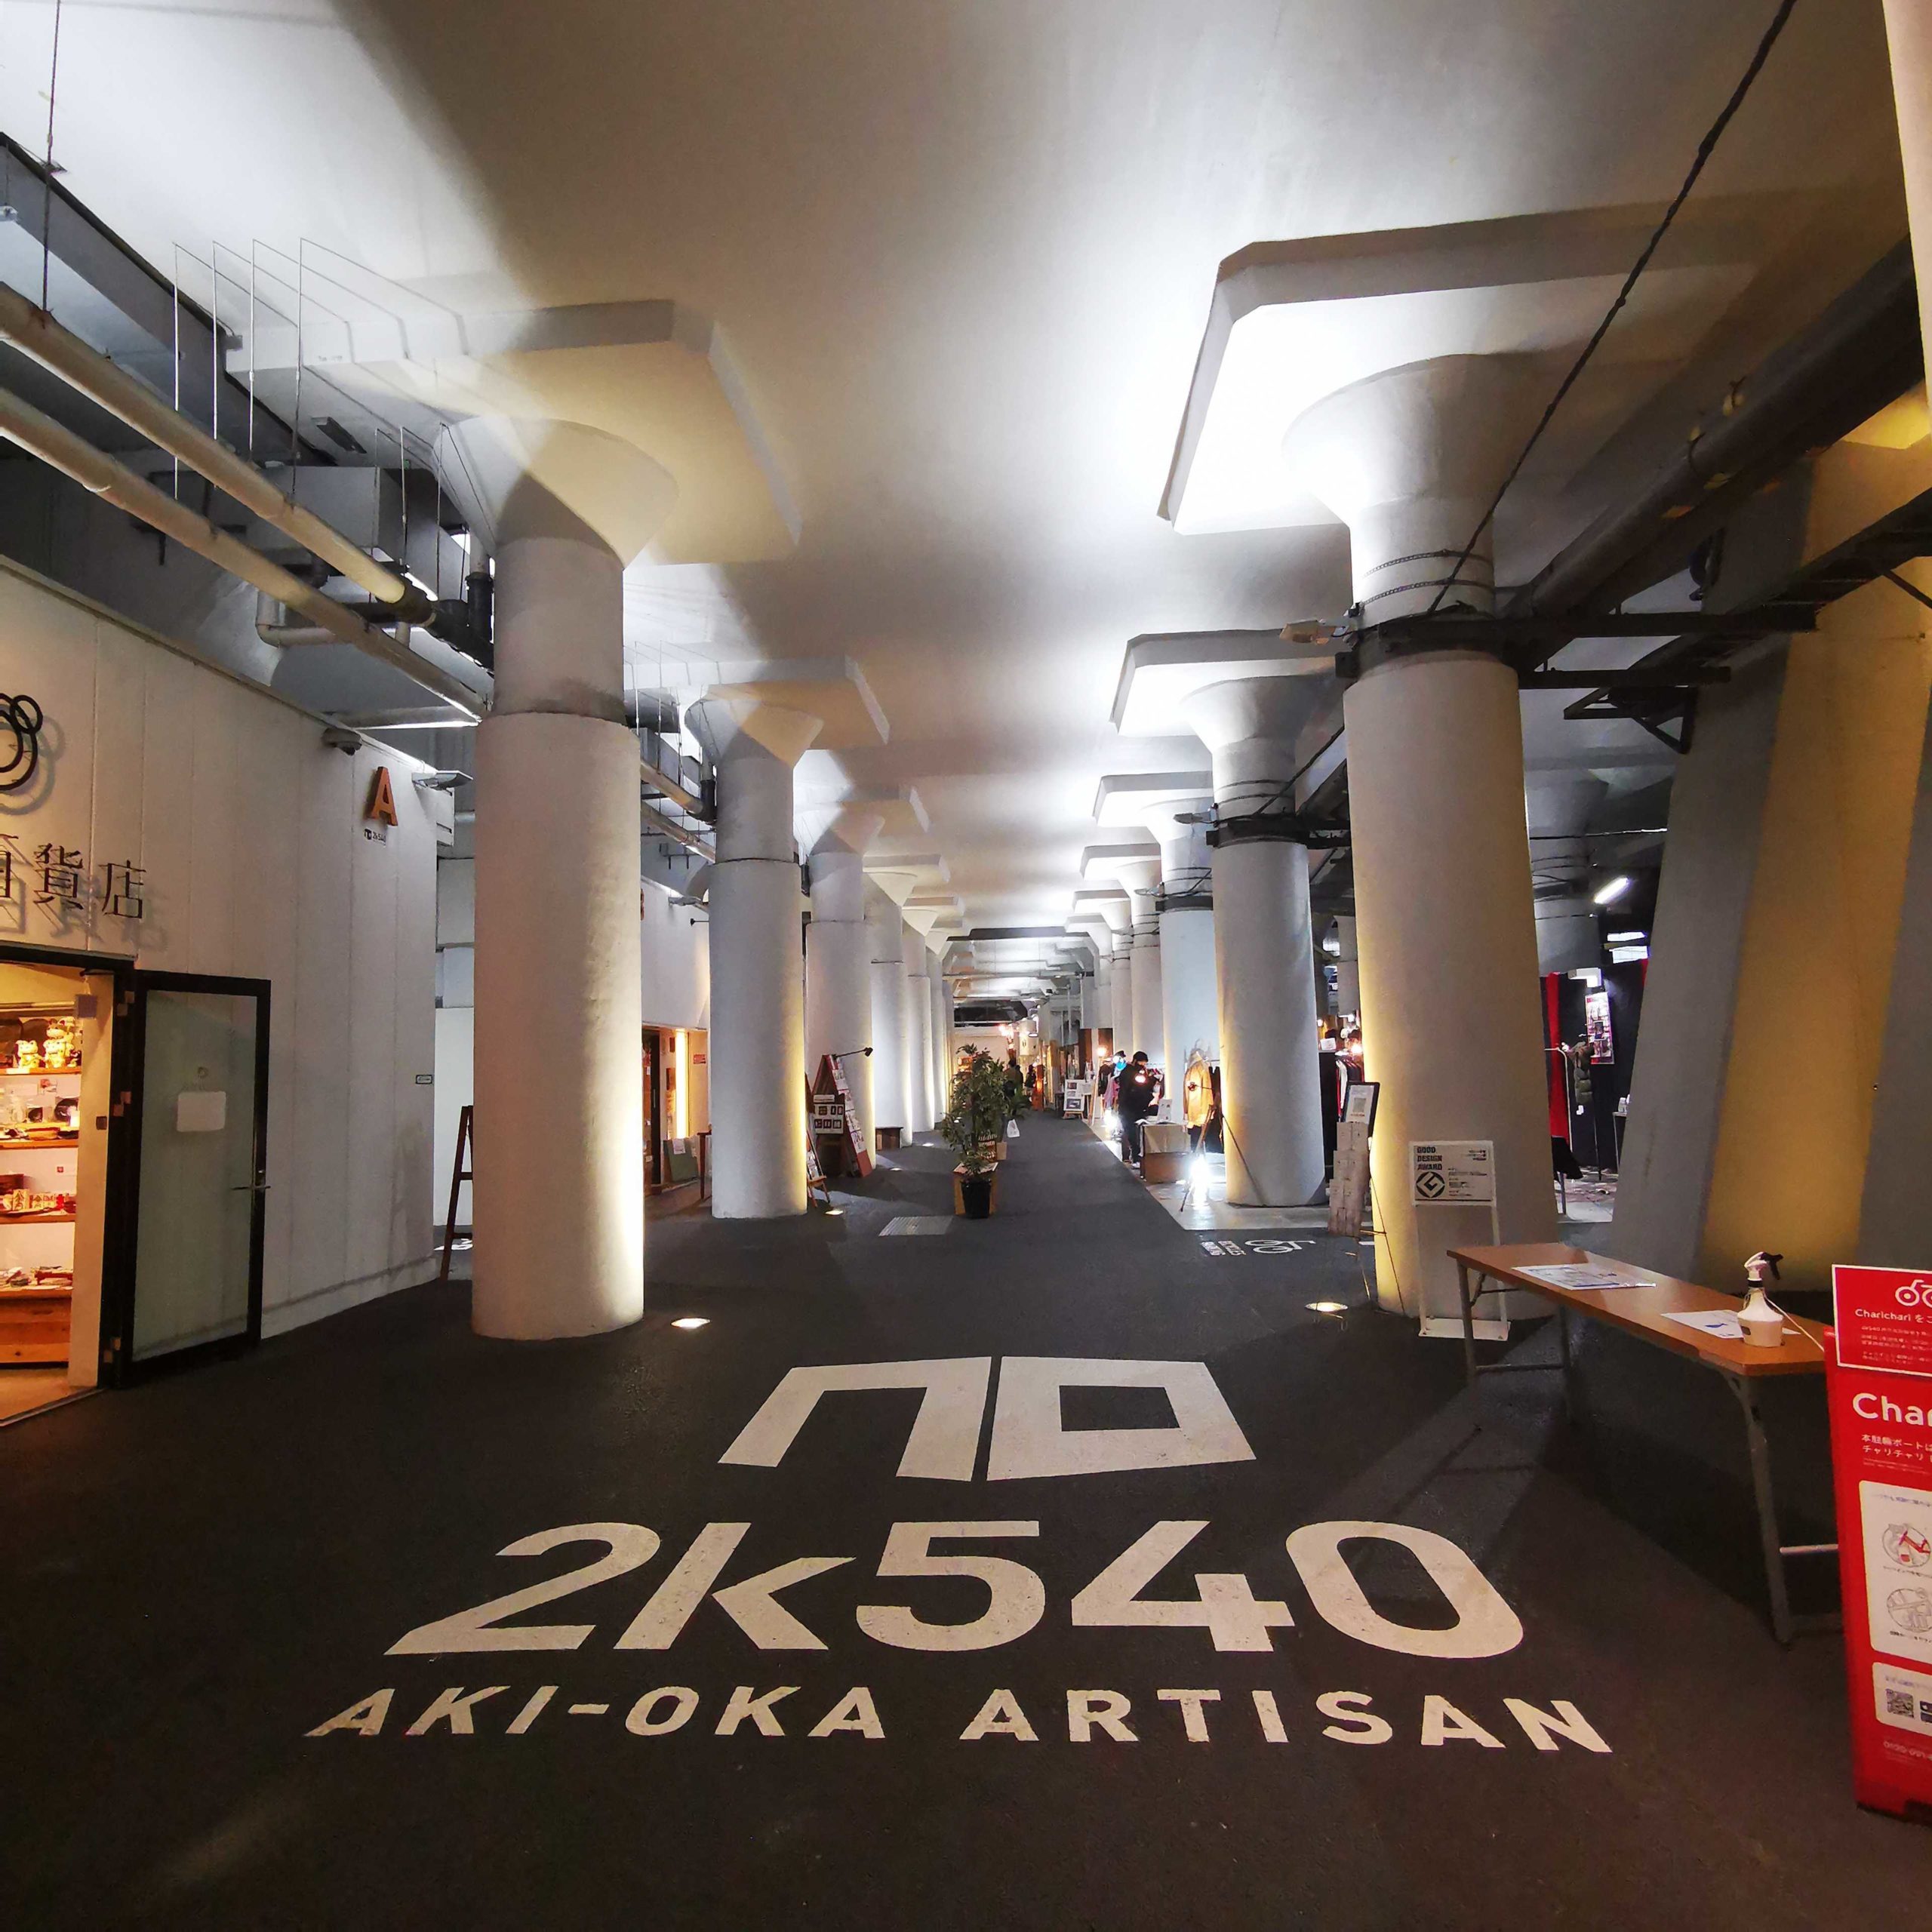 A Renovated Space Under a Railway